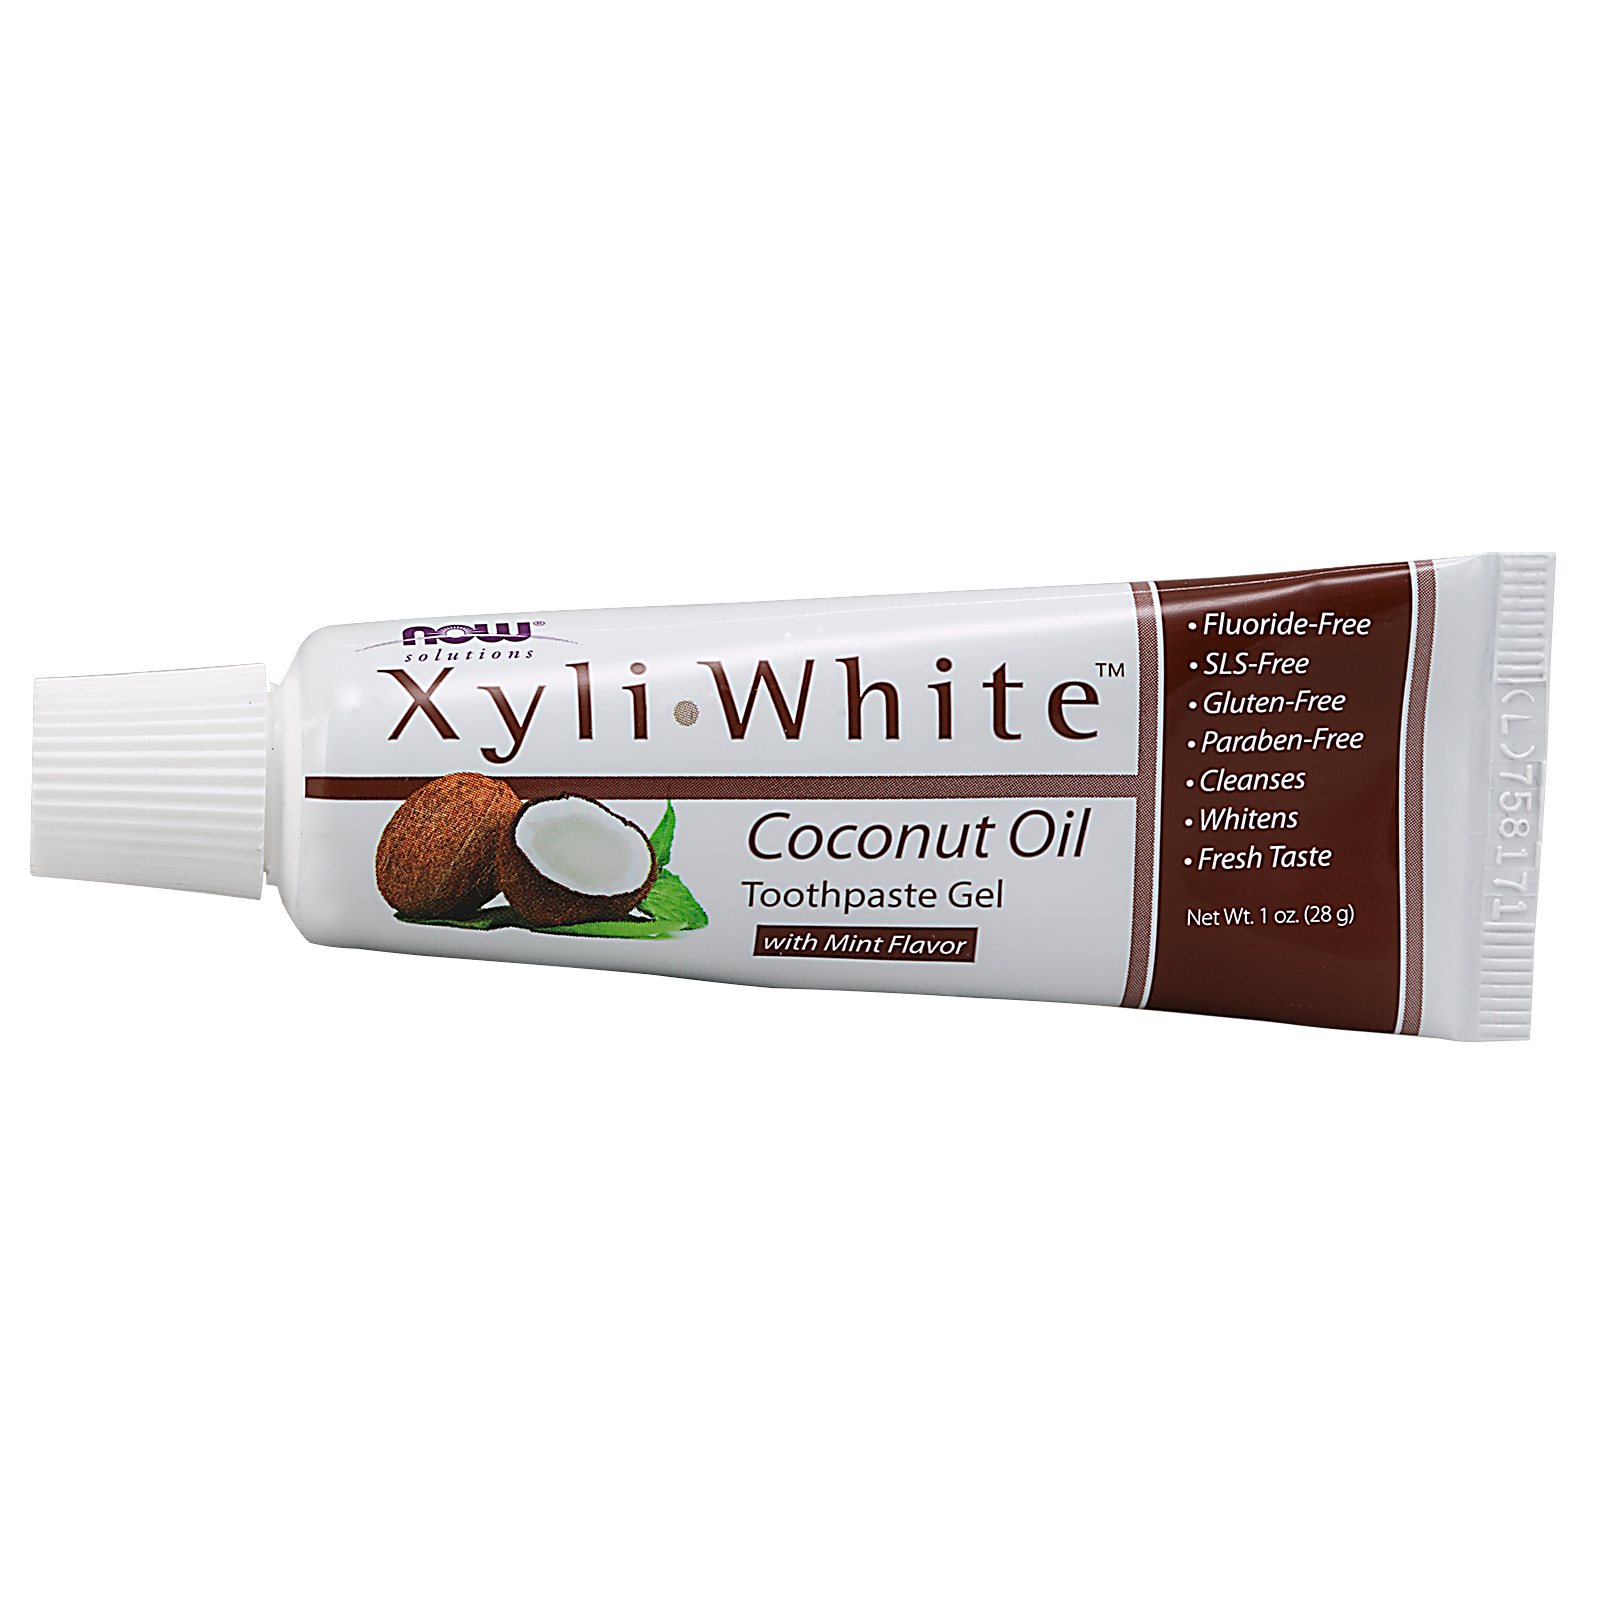 XyliWhite™ Coconut Oil Toothpaste Gel - 1 oz.